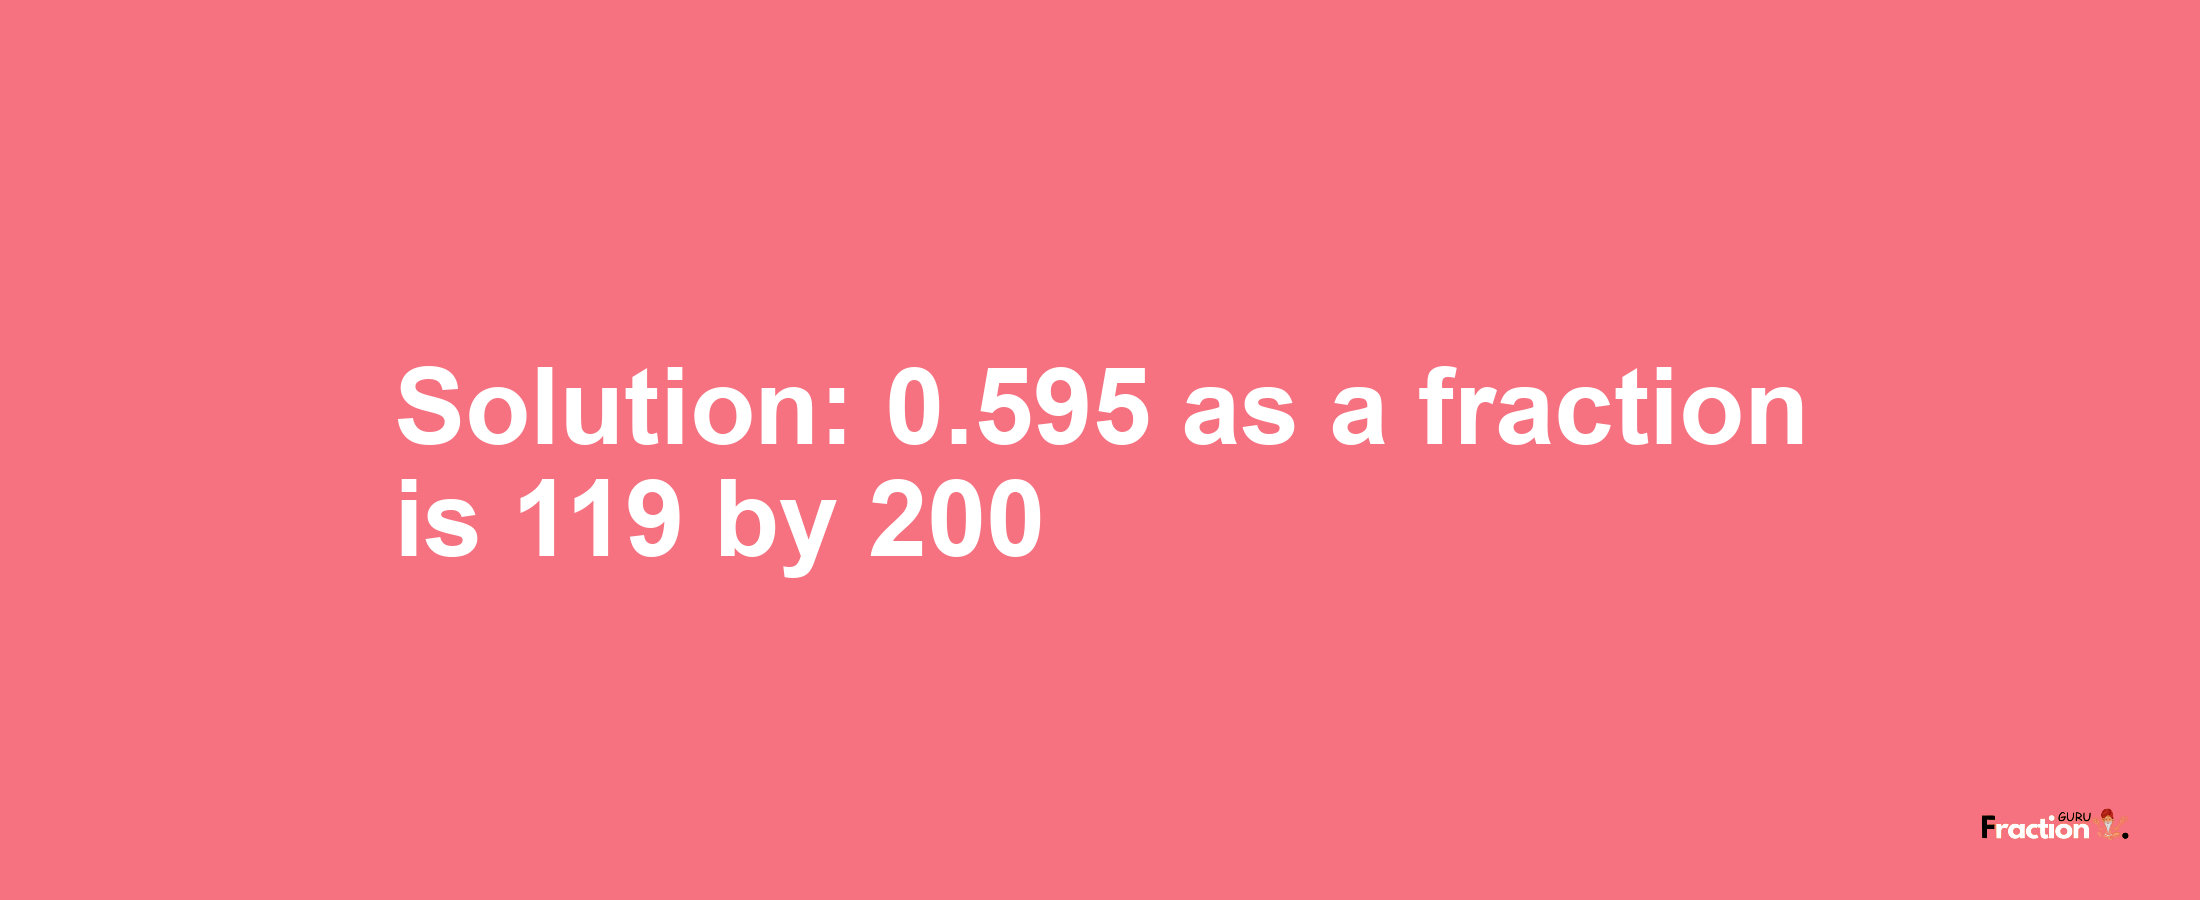 Solution:0.595 as a fraction is 119/200